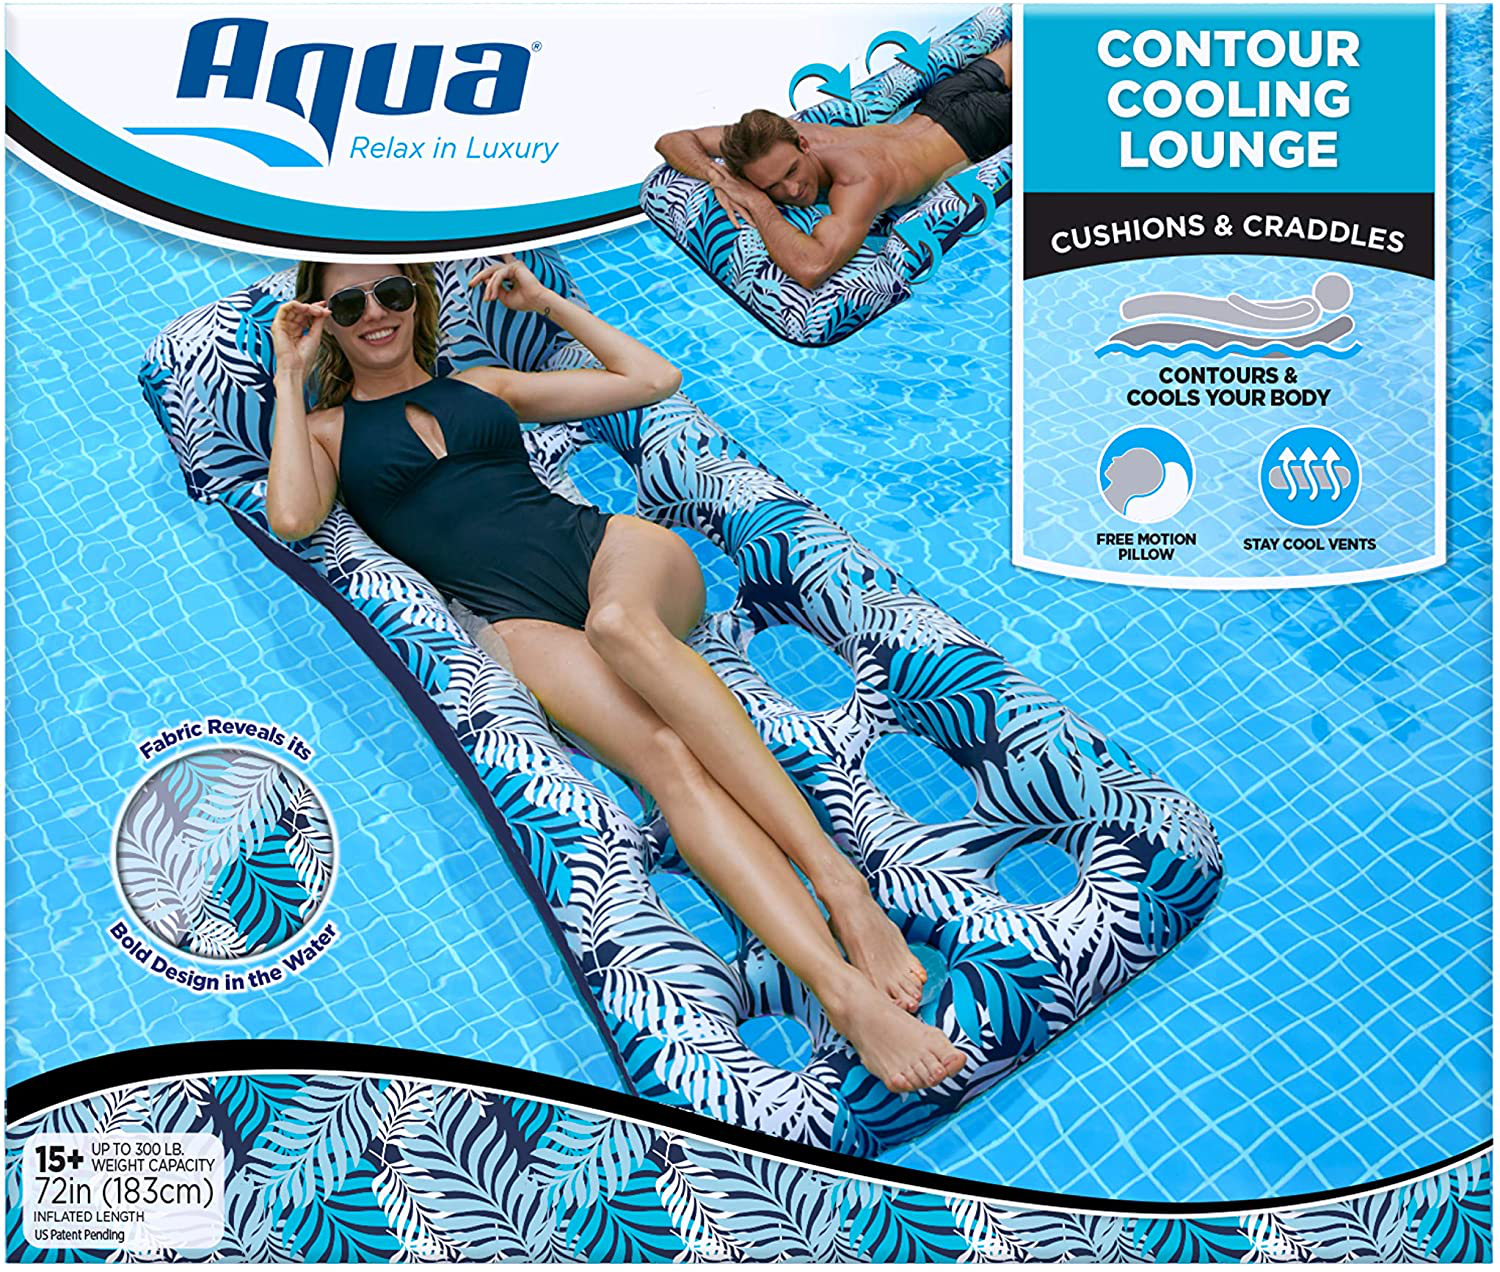 AQUA Deluxe Contour Pool Chair Lounge, Luxury Fabric, Suntanner Adult Size Pool Float, Lake Floating Chair, Heavy Duty, Blue/White Fern